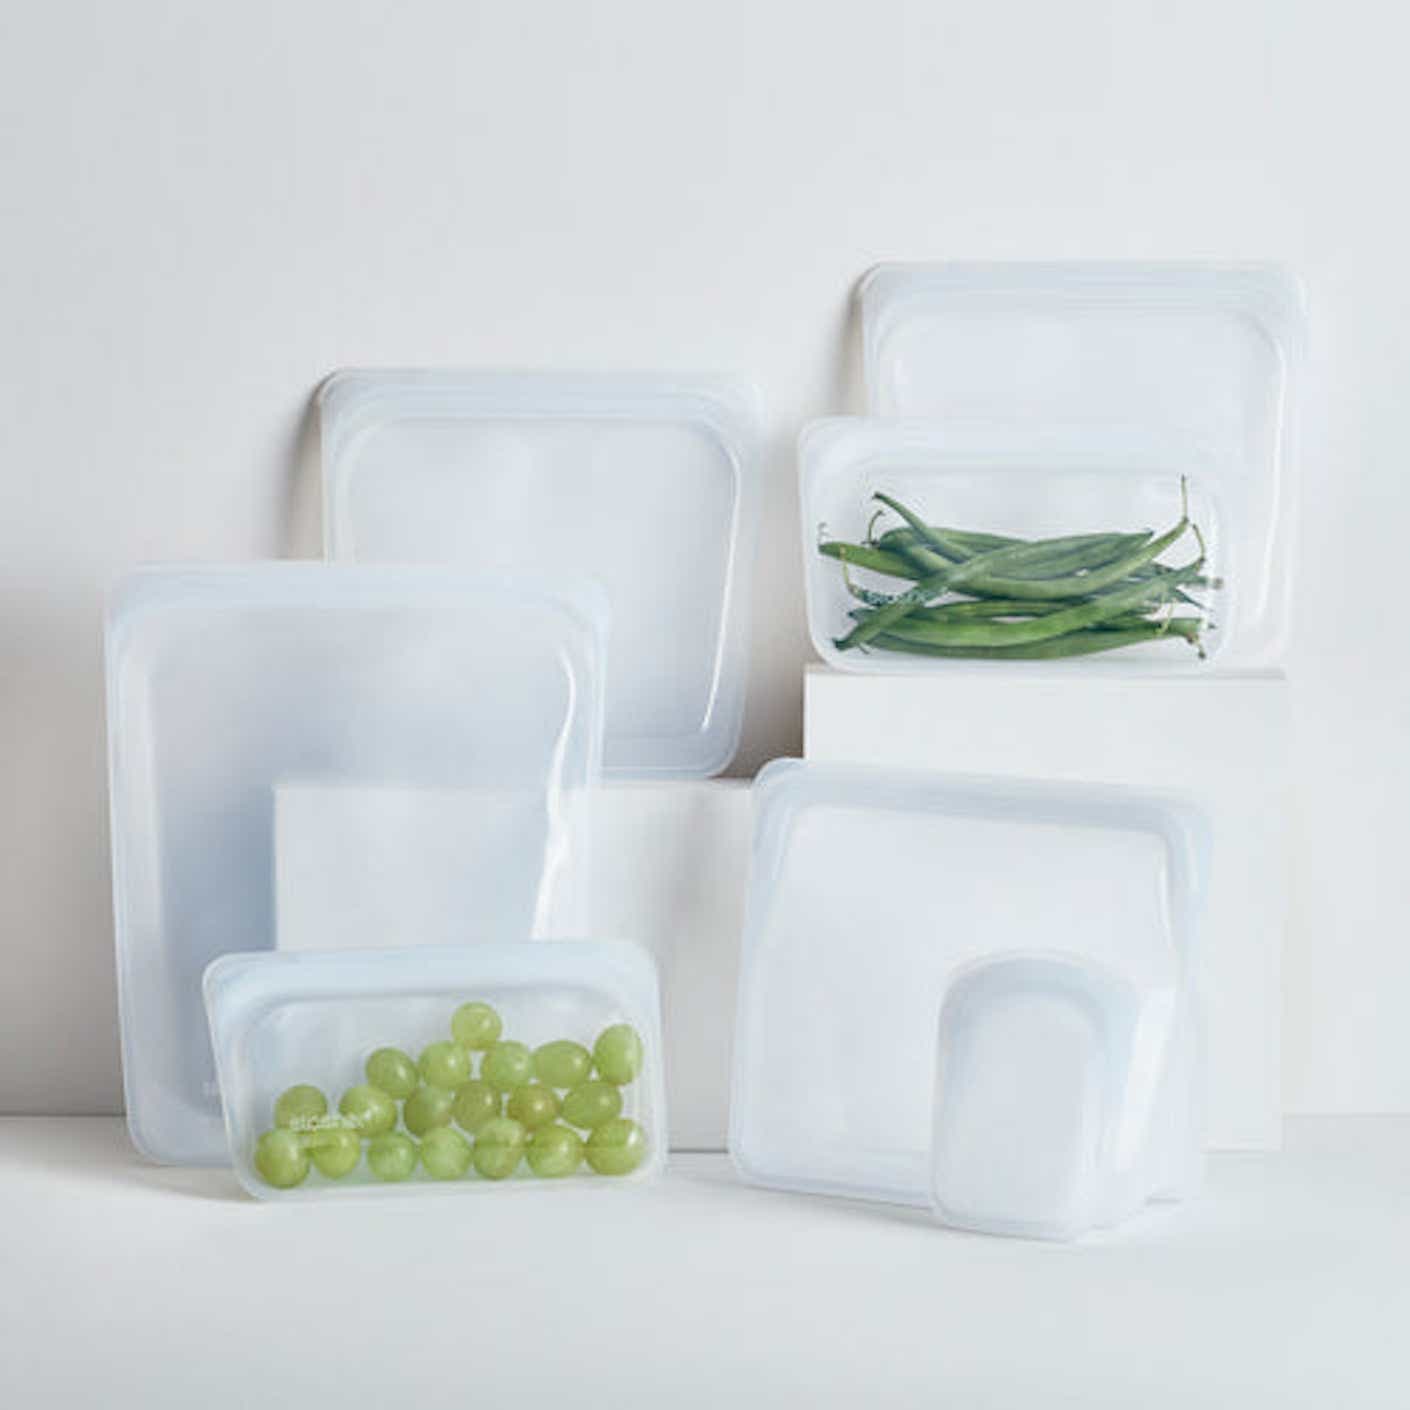 Clear food storage bags stacked against a white background.